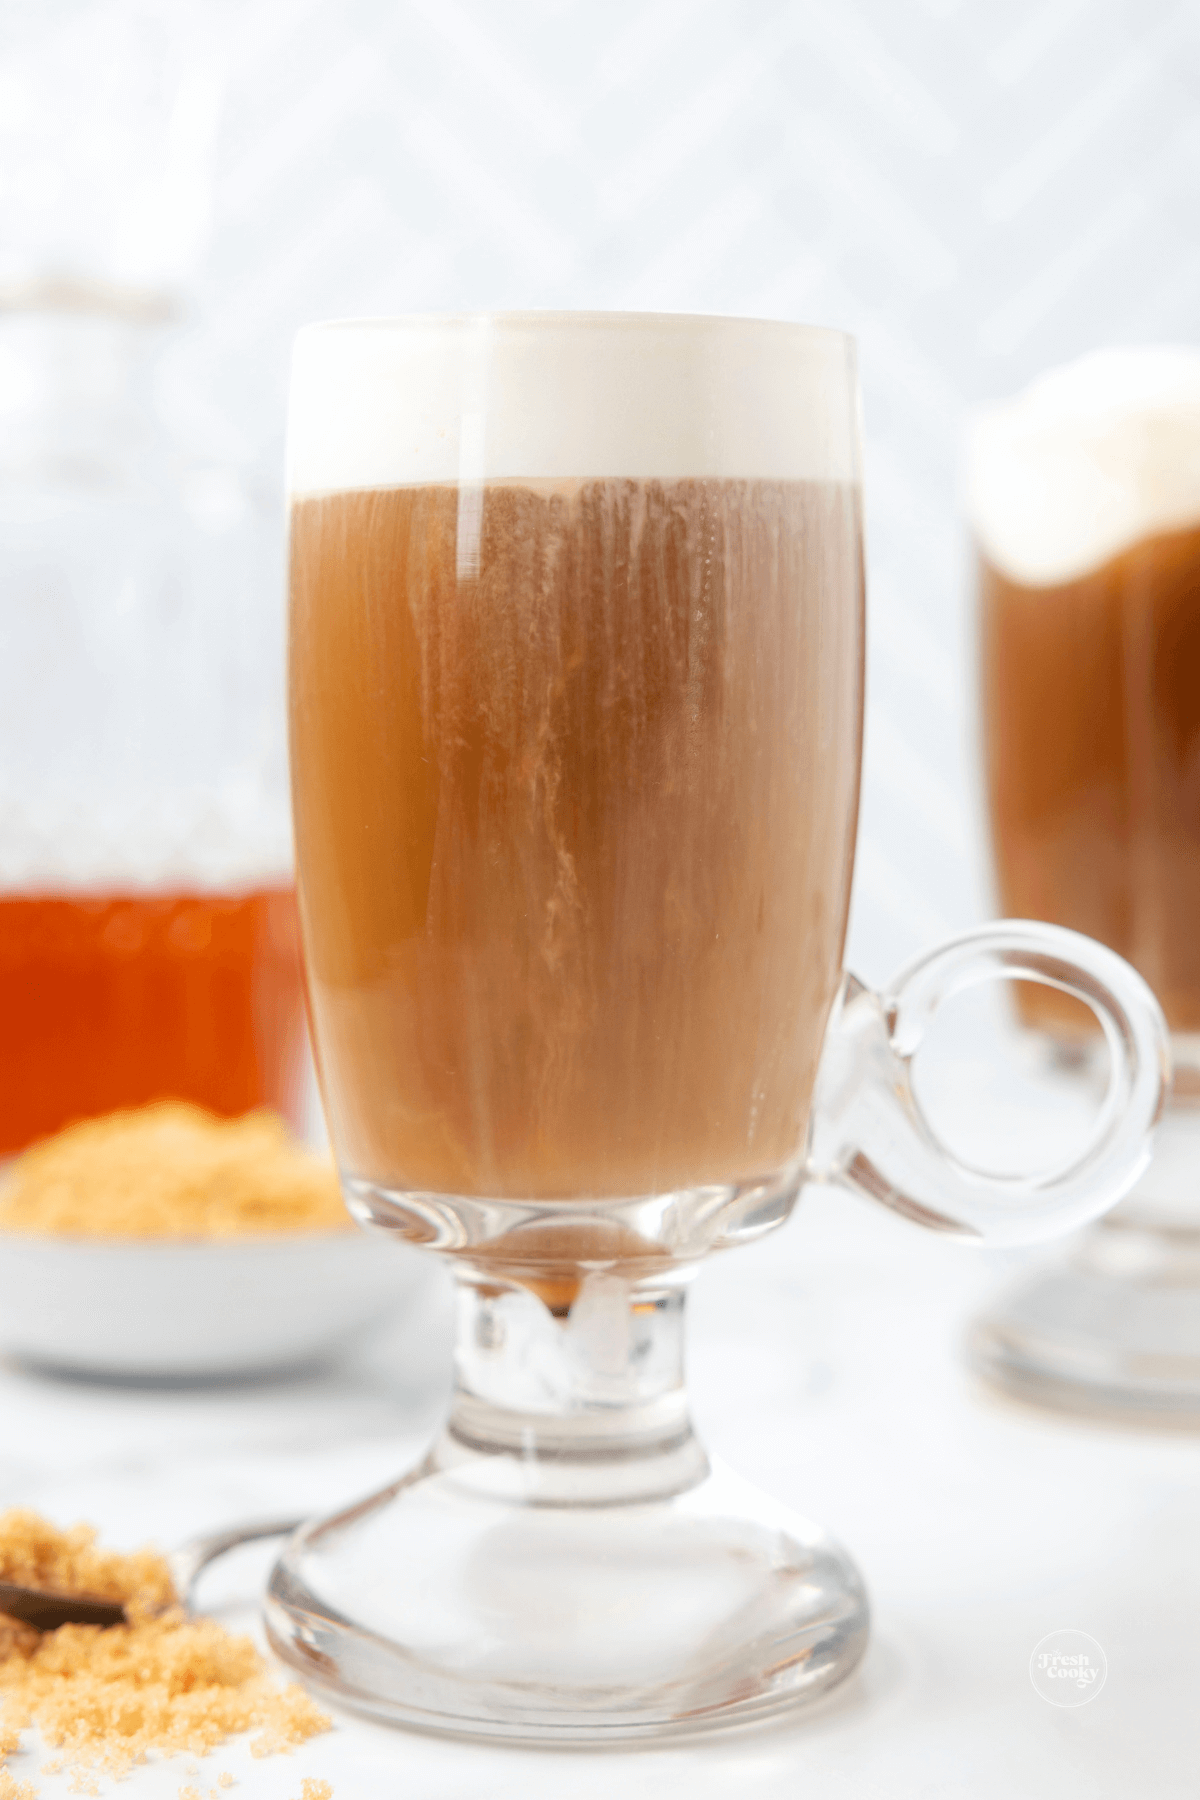 Easy Irish coffee recipe, in glass mugs with brown sugar and a decanter of whiskey in background.